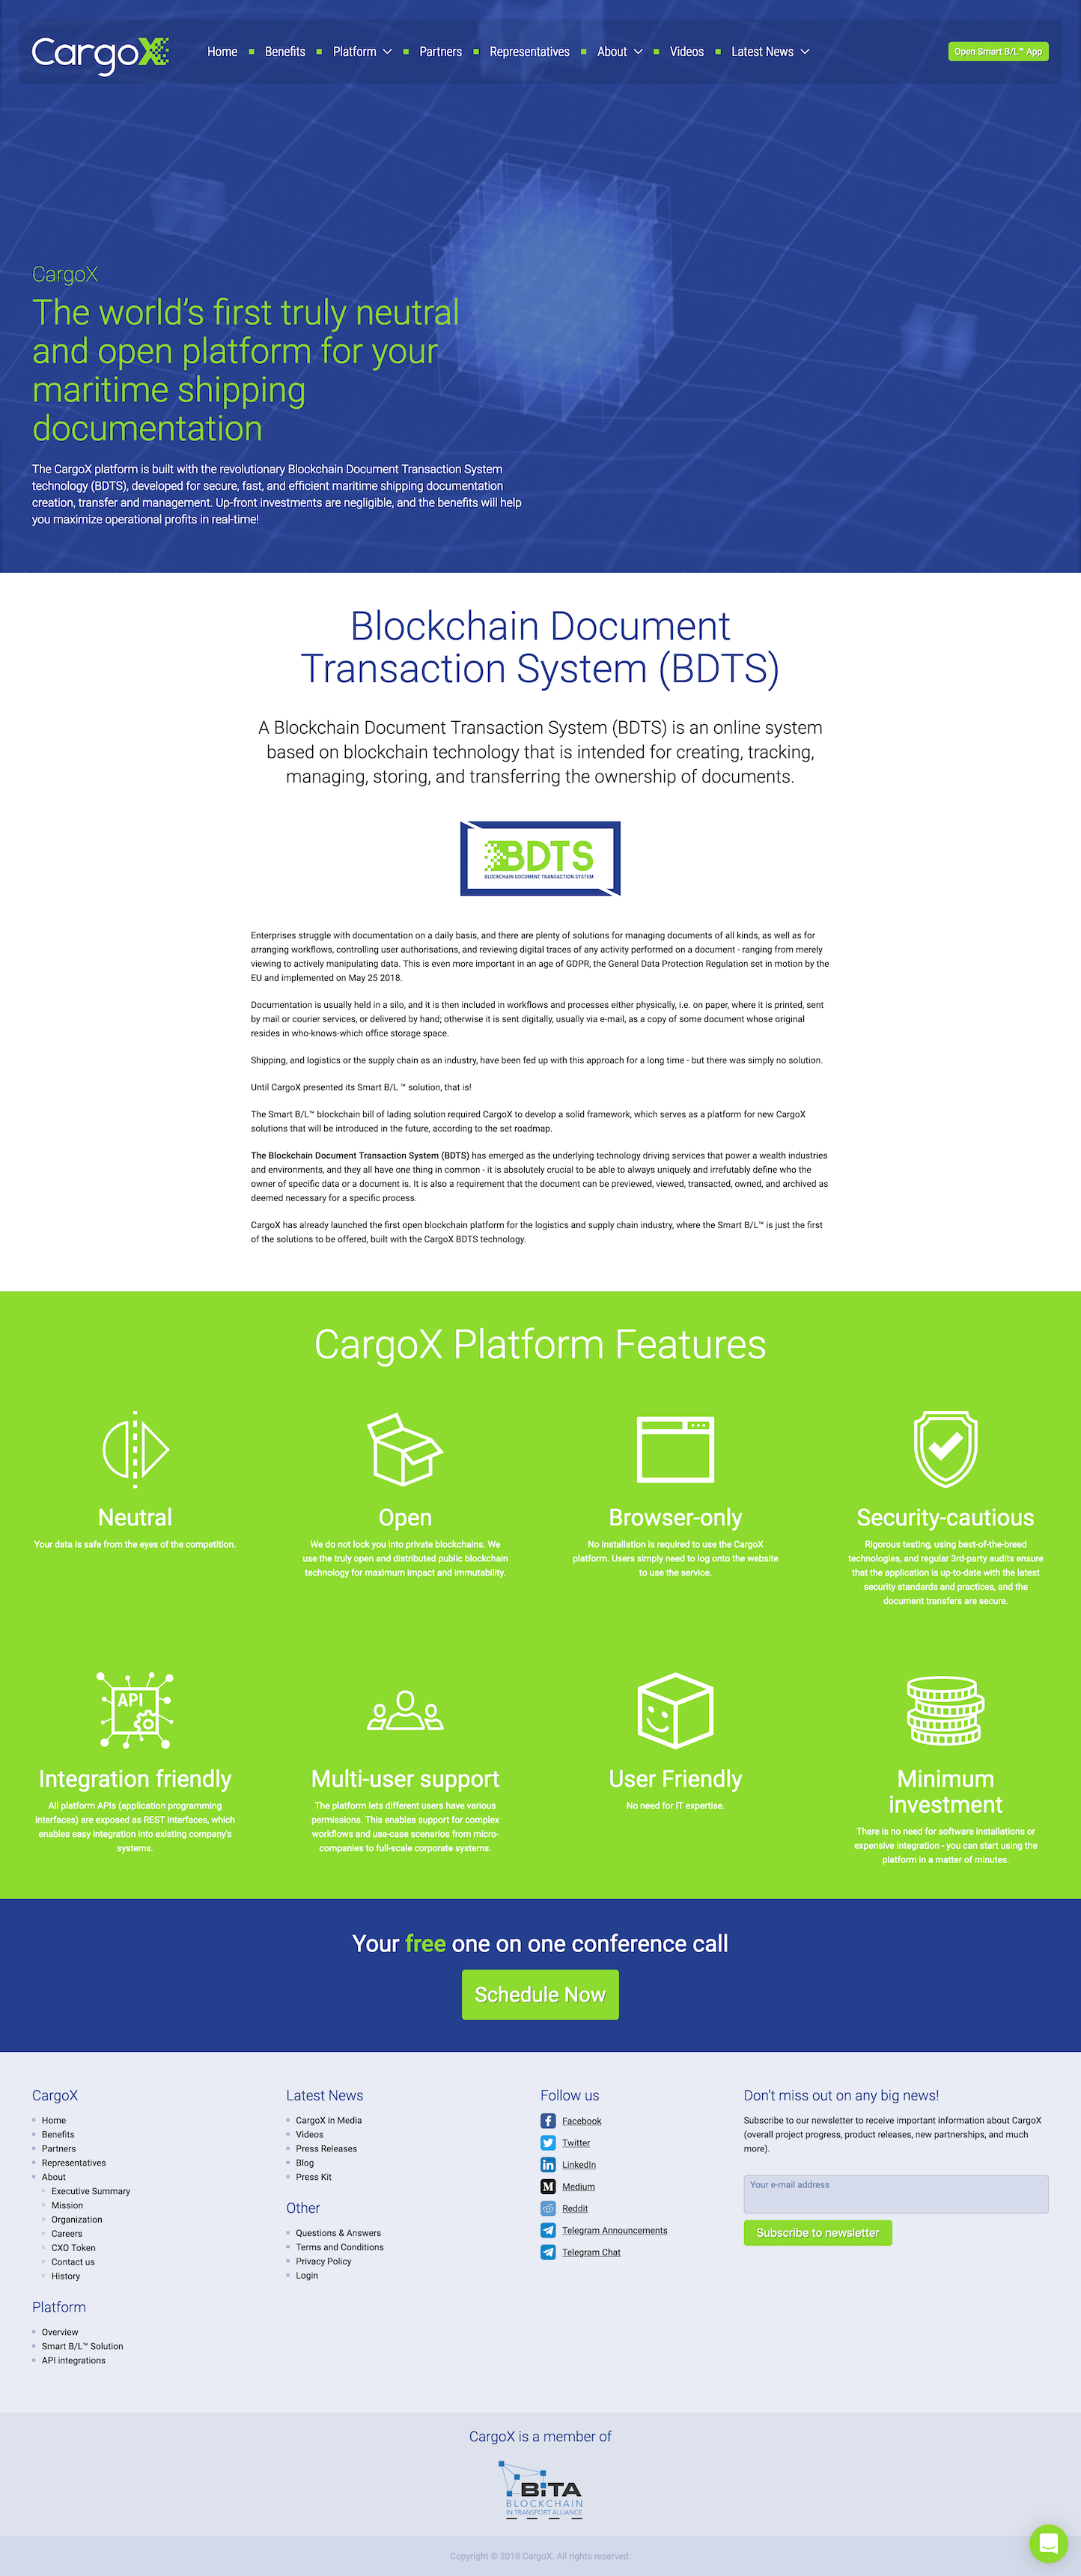 Screenshot of the Platform Overview page from the CargoX website.